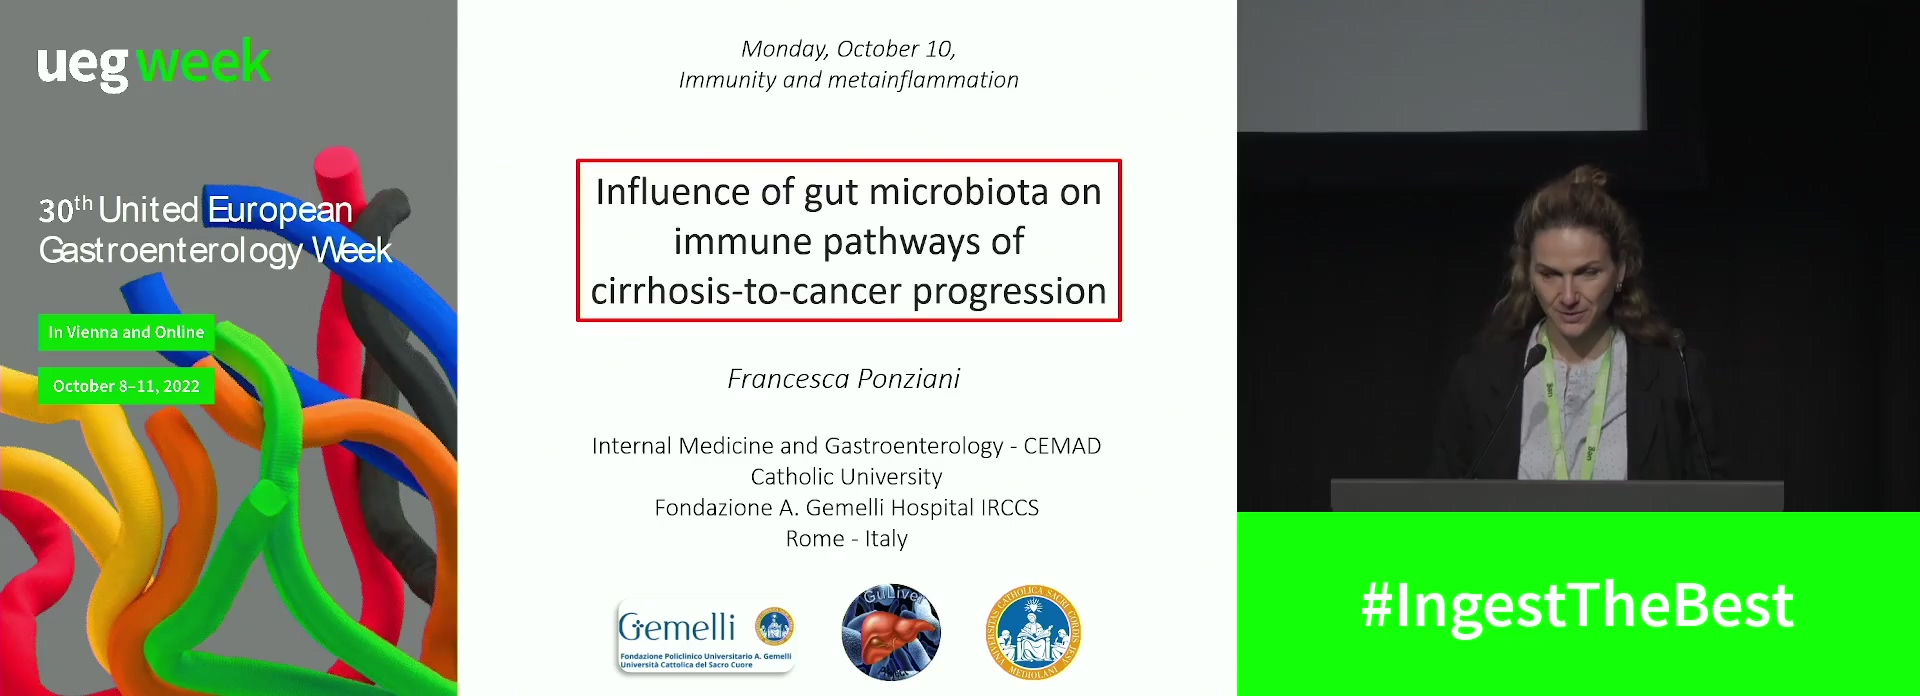 Influence of gut microbiota on immune pathways of cirrhosis-to-cancer progression